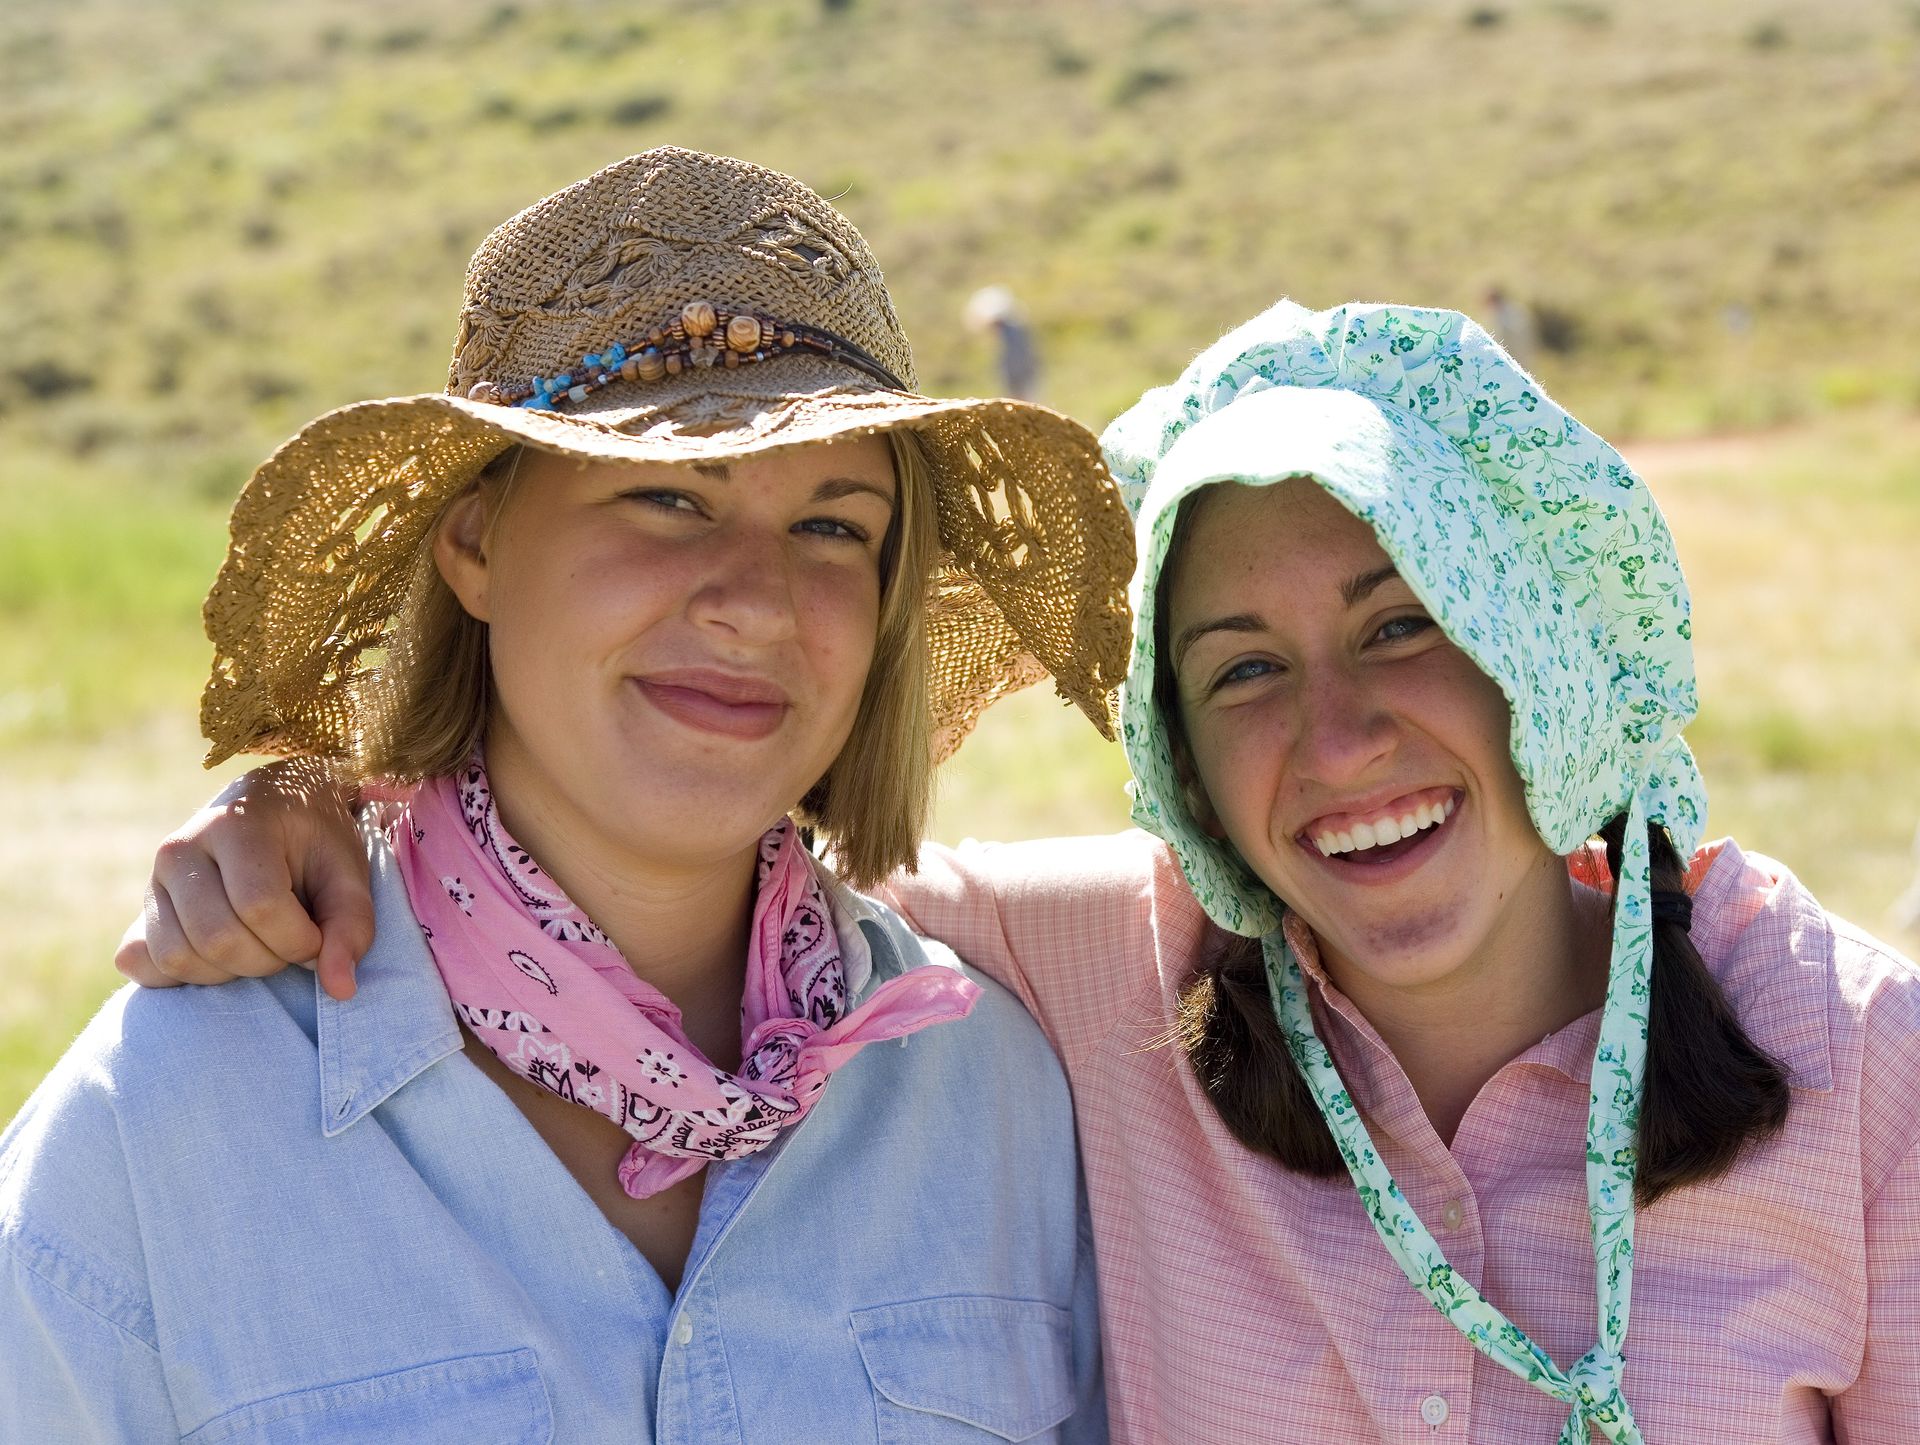 Two young women dressed as pioneers smile together while on trek.